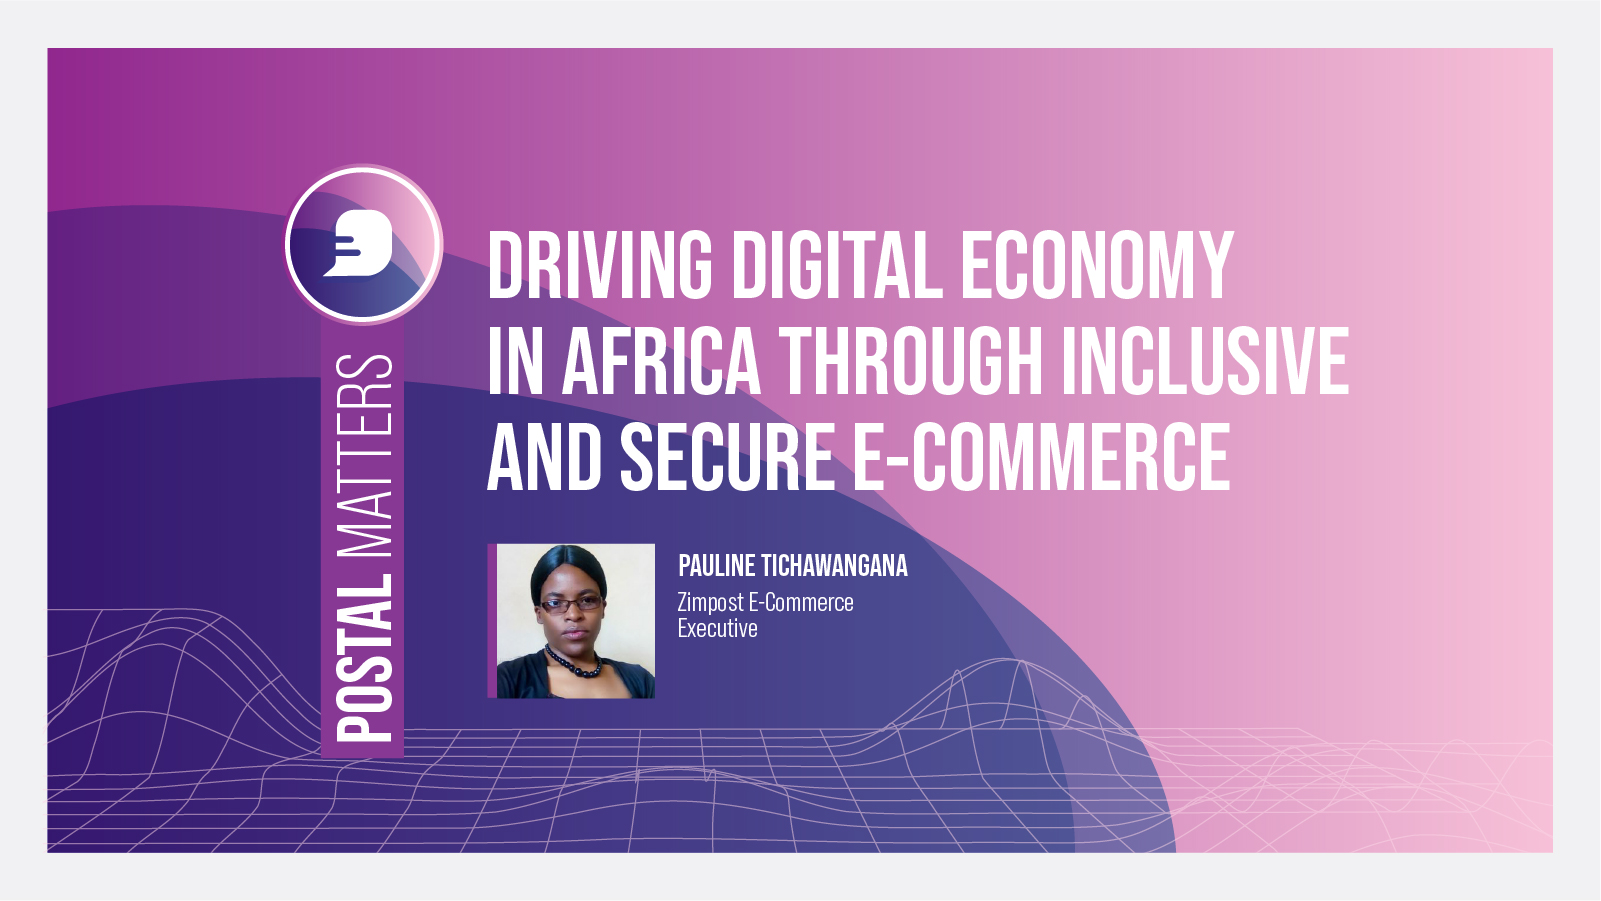 Driving digital economy in Africa through inclusive and secure e-commerce 